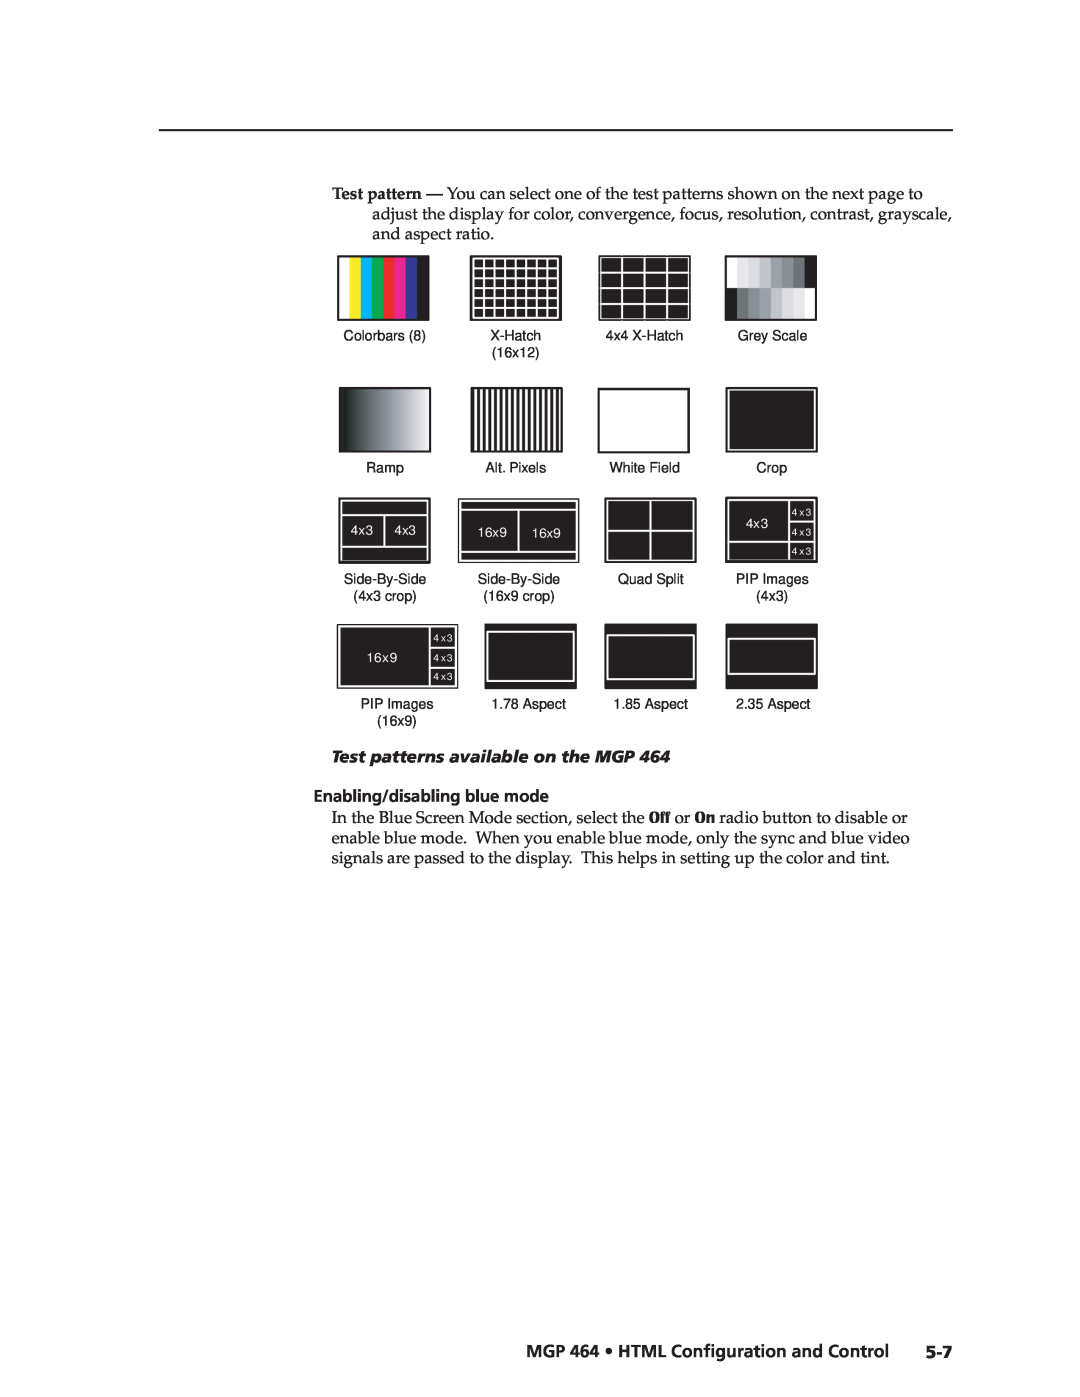 Extron electronic MGP 464 DI manual Preliminary, Test patterns available on the MGP, Enabling/disabling blue mode 